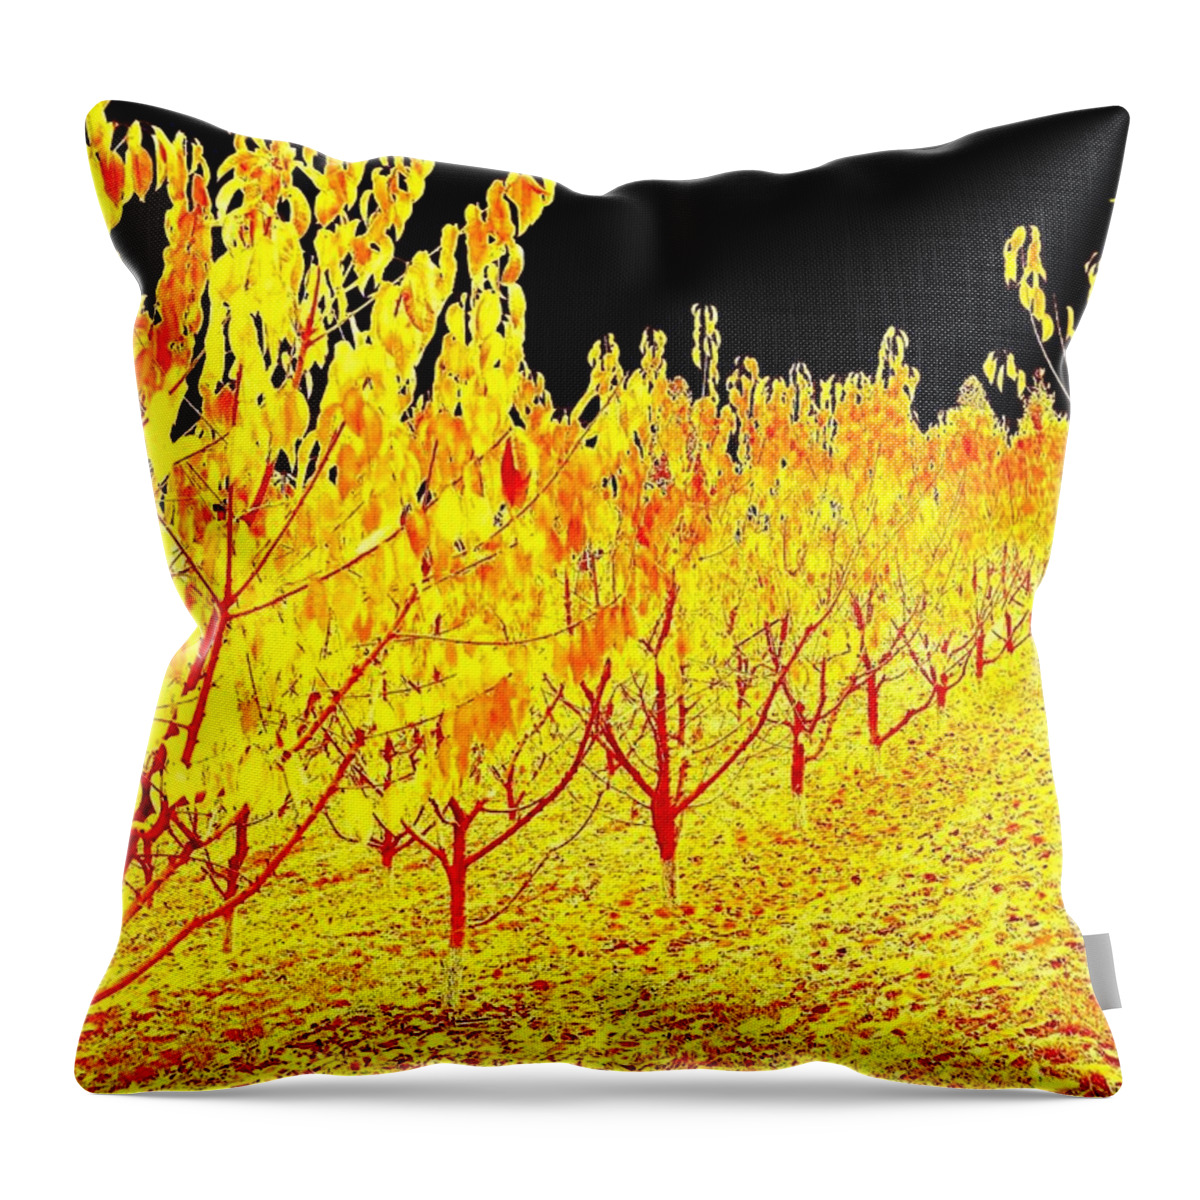 Cherry Orchard Throw Pillow featuring the digital art Cherry Orchard by Will Borden